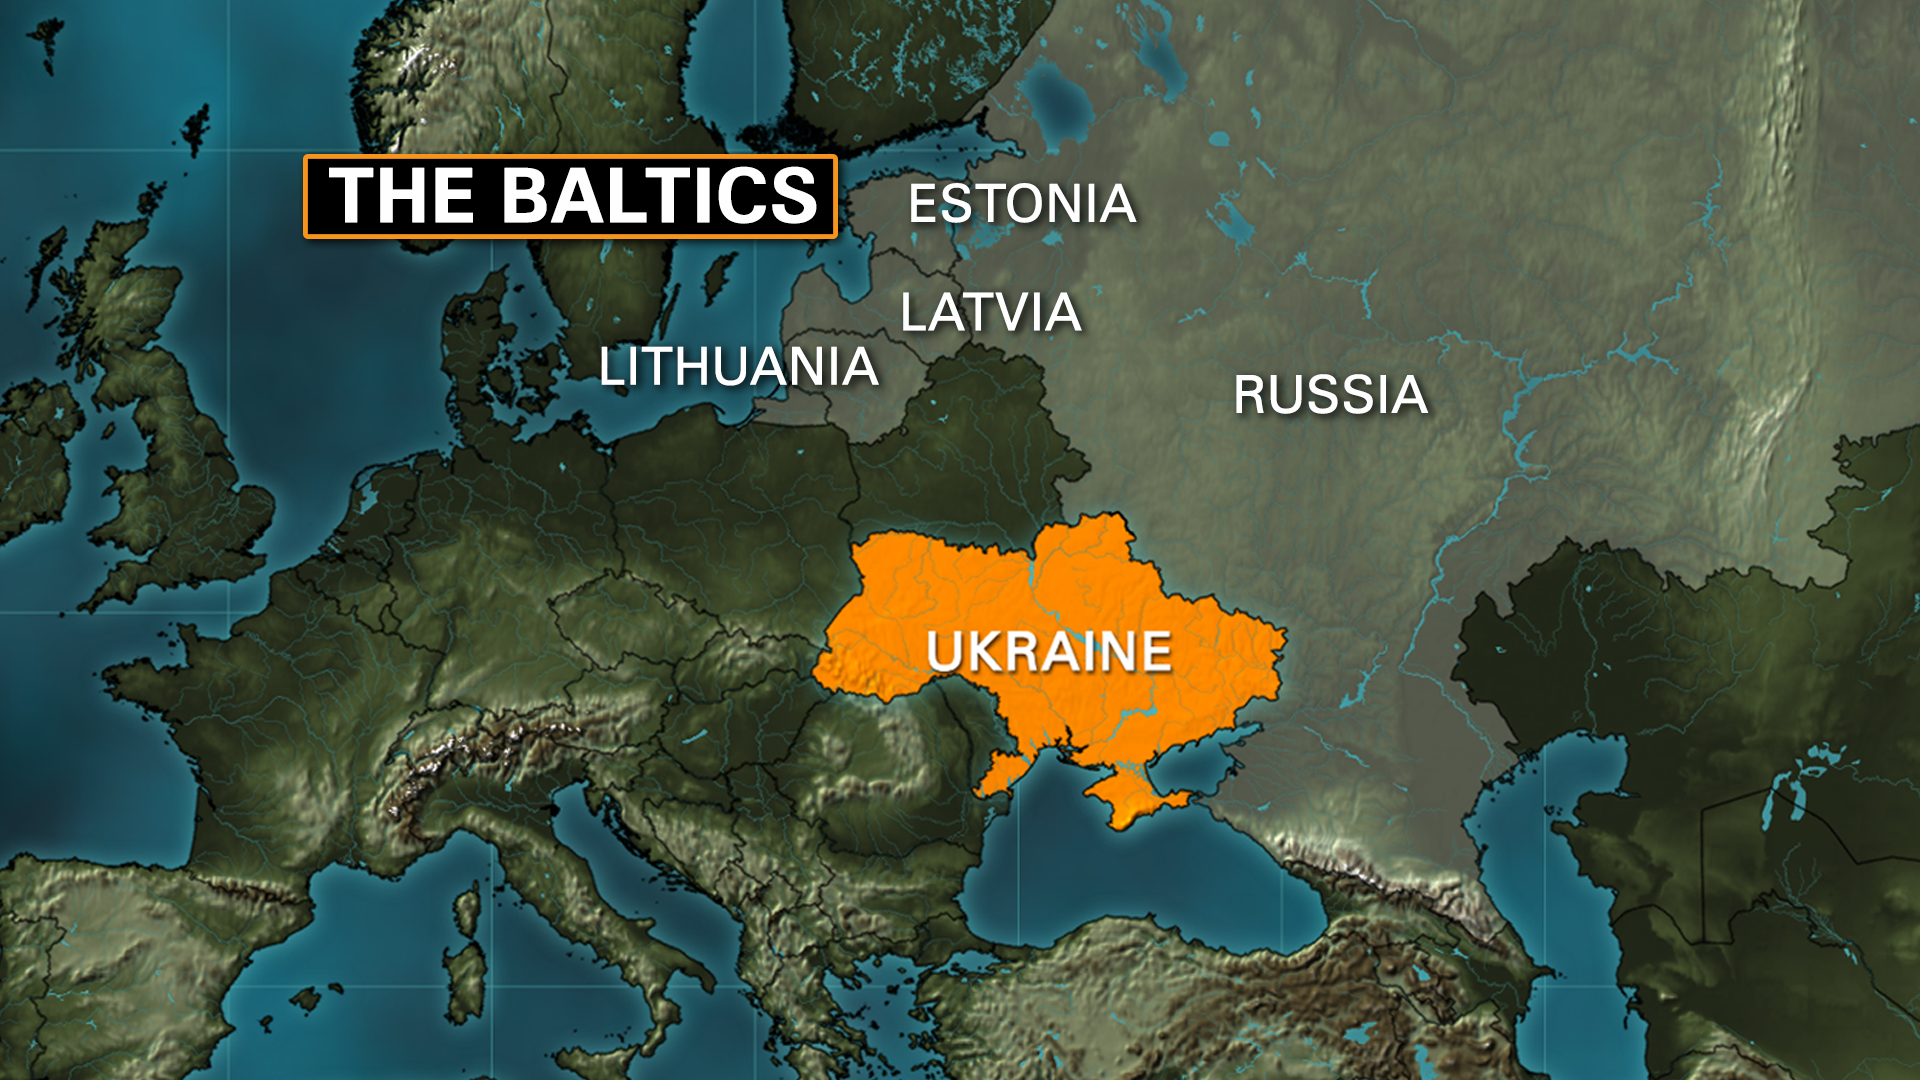 SOTU EXTRA: The Baltics and Russia's next move